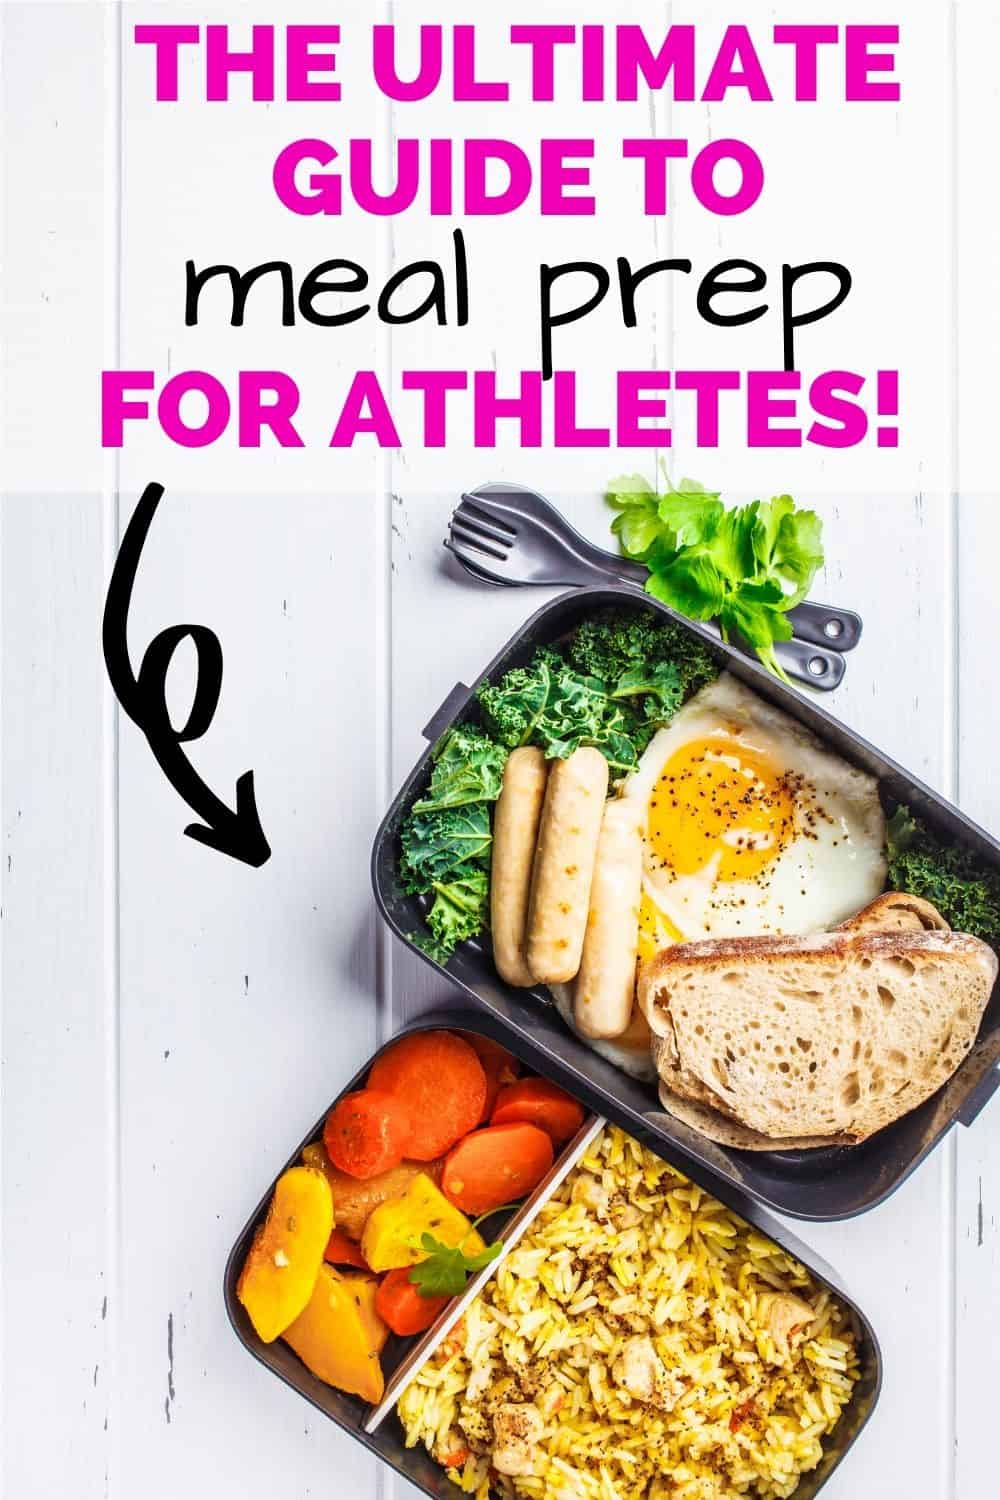 Meal prep for athletes